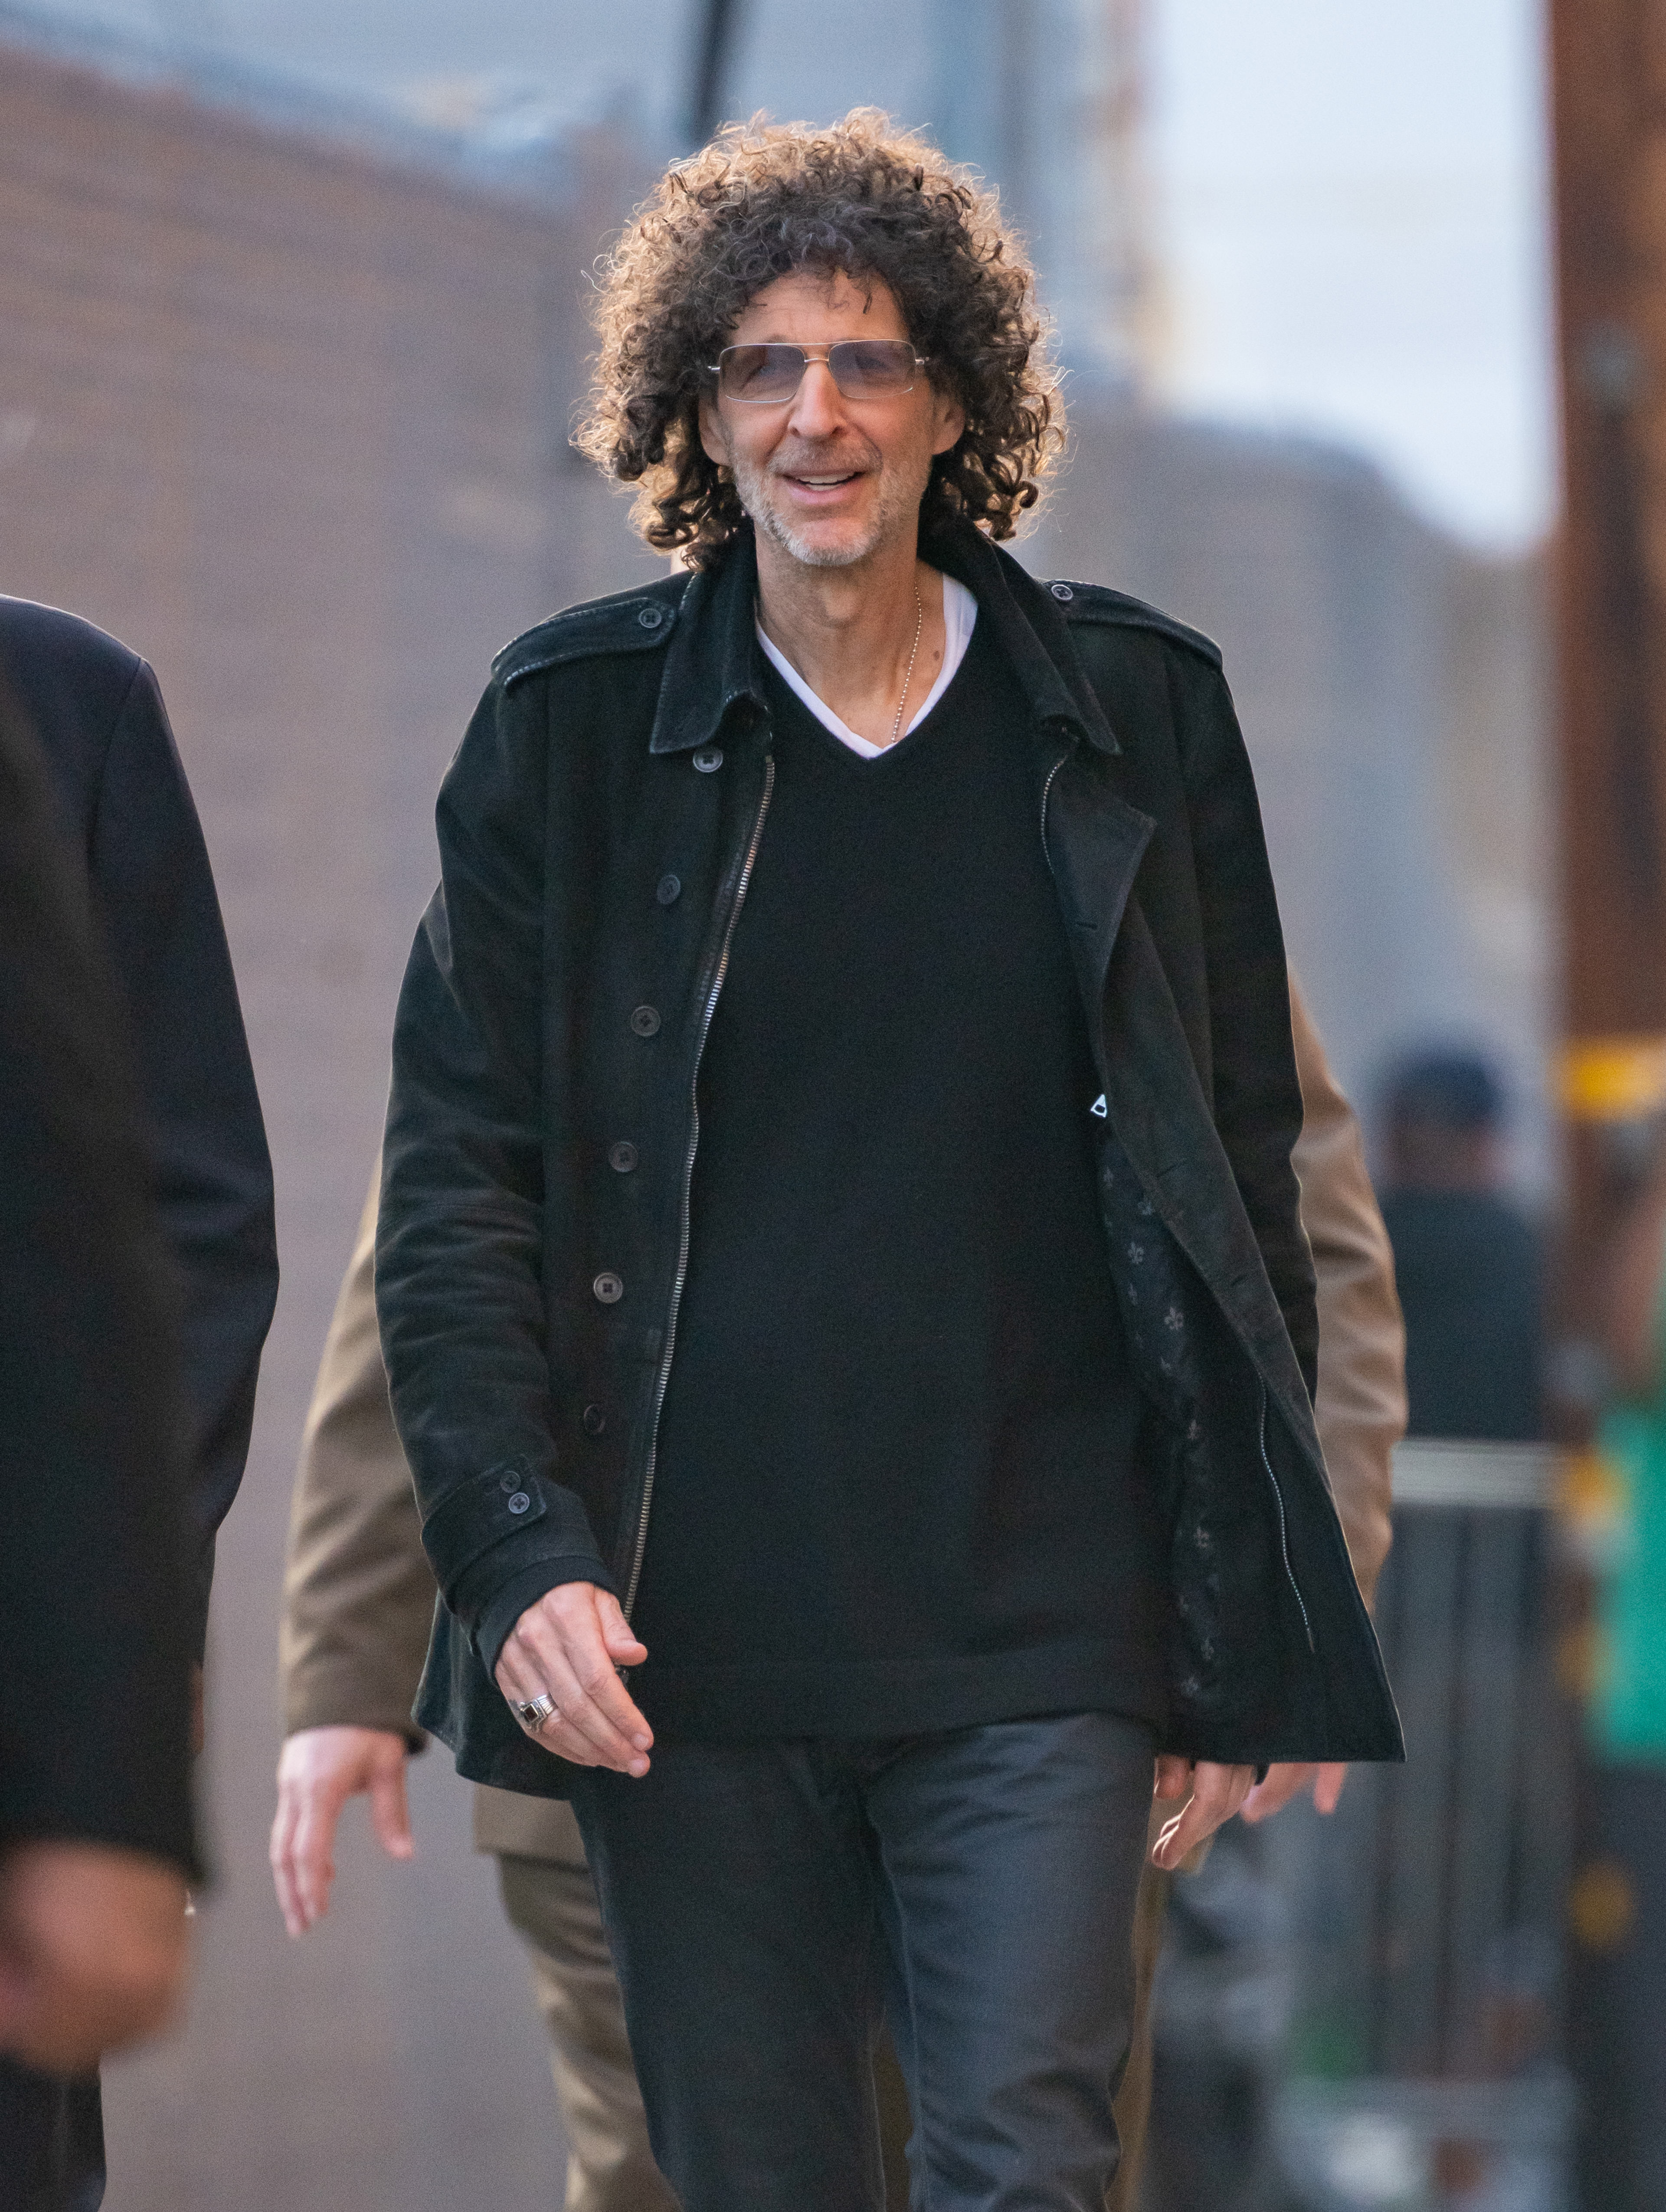 Howard Stern is seen at 'Jimmy Kimmel Live' on October 09, 2019, in Los Angeles, California. | Source: Getty Images